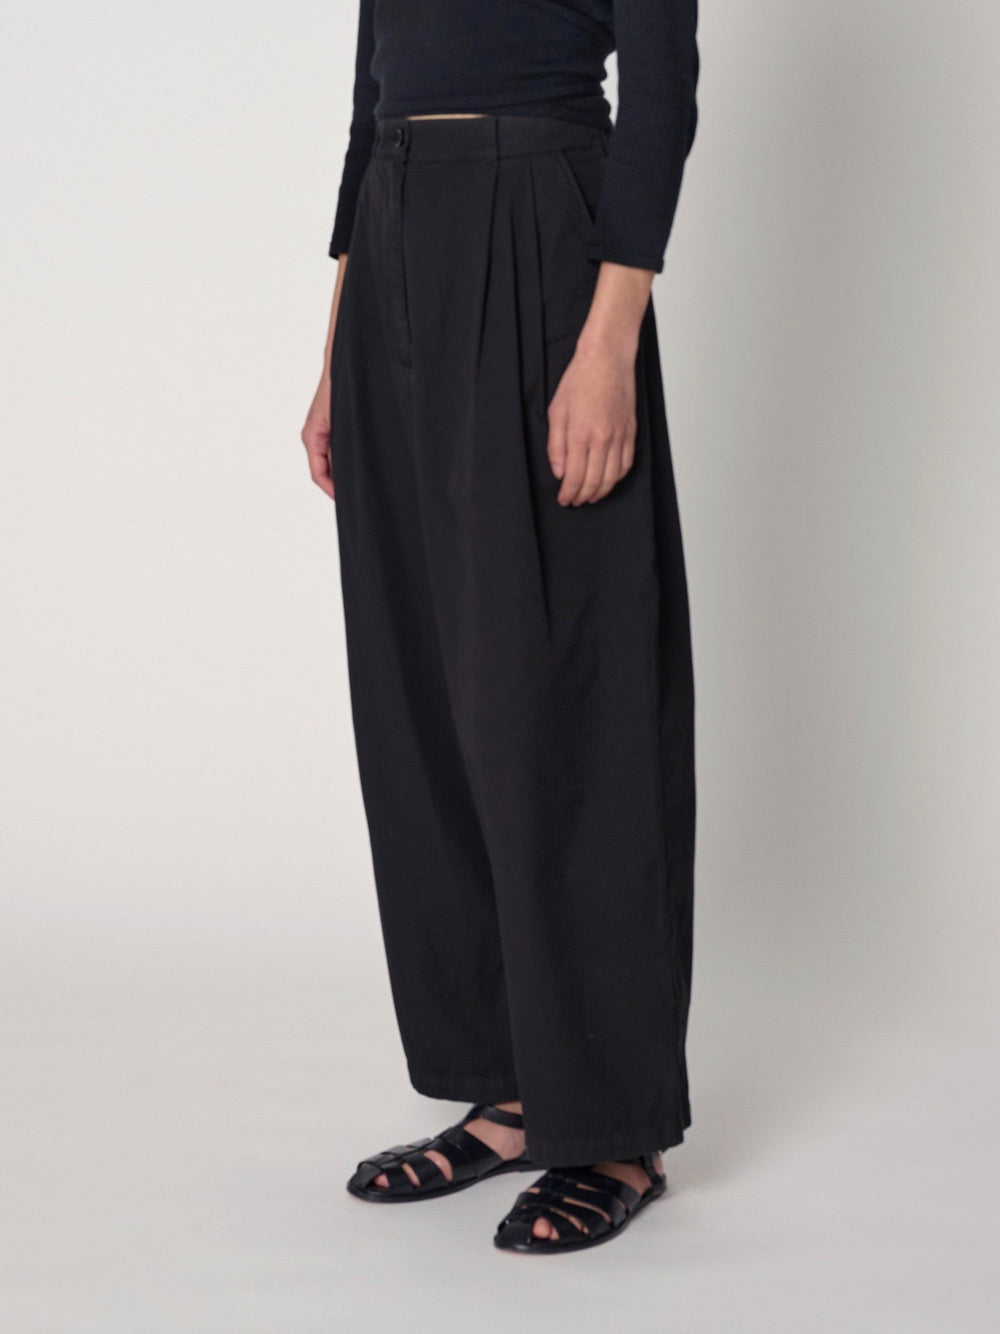 Shaina Mote | Boy Trouser Washed Cotton in Onyx